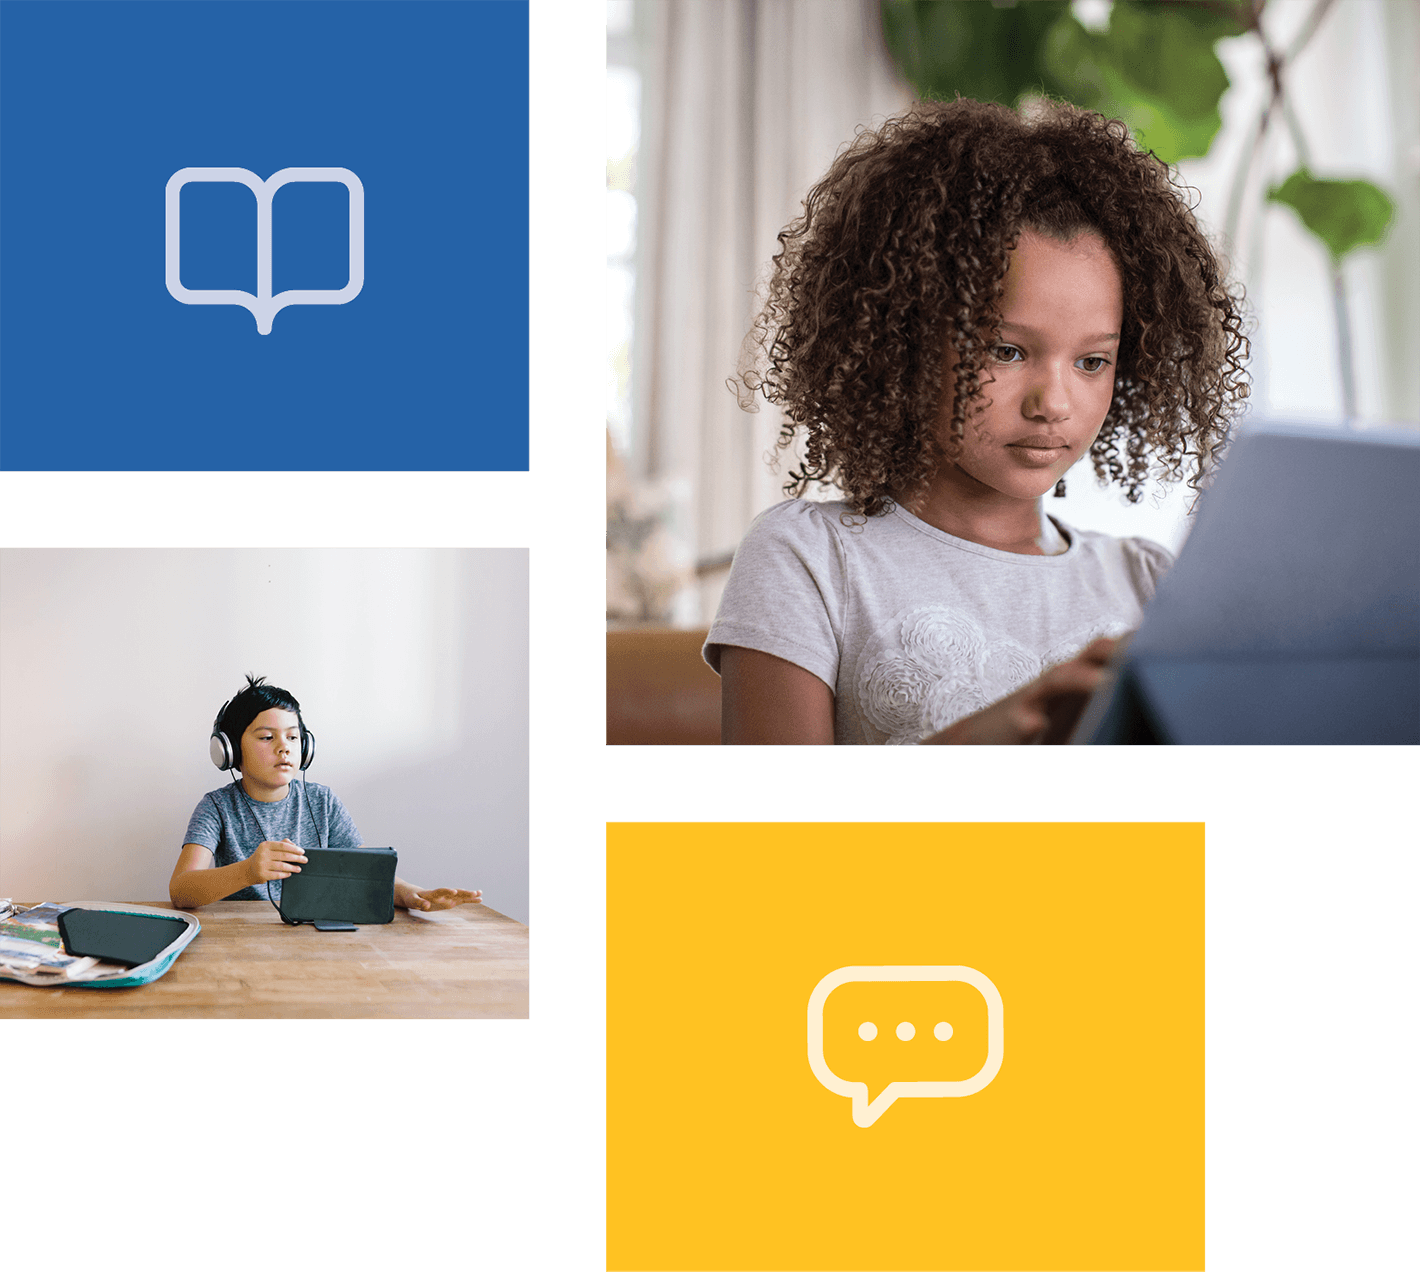 Collage of three images: a book icon, a young girl using a laptop, and a speech bubble icon, symbolizing education and communication.